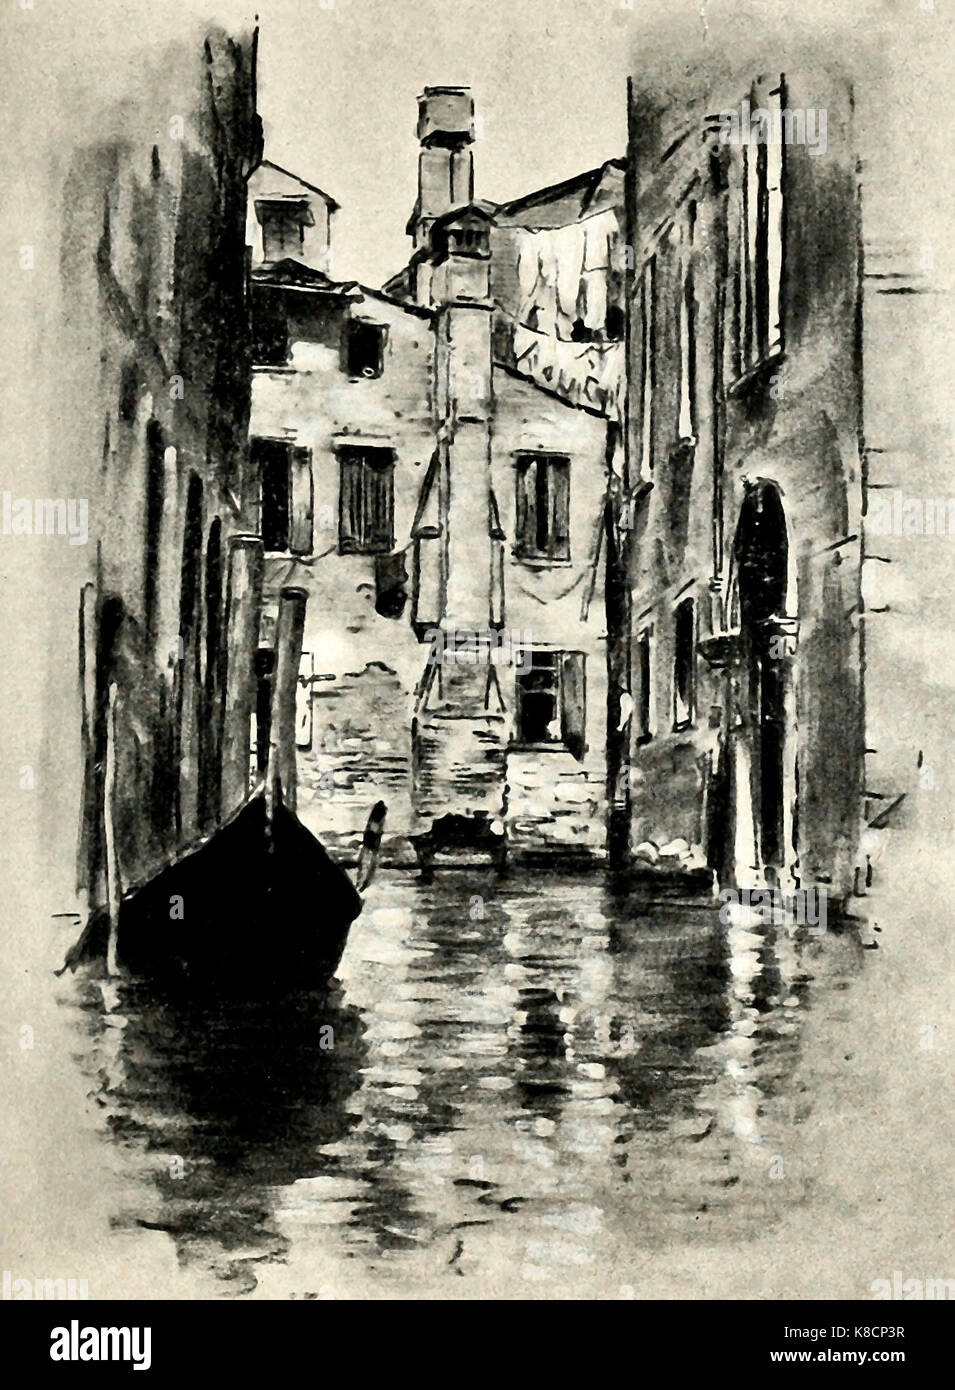 This charcoal and lead pencil drawing of Venice Italy took me 8 hours   rnextfuckinglevel